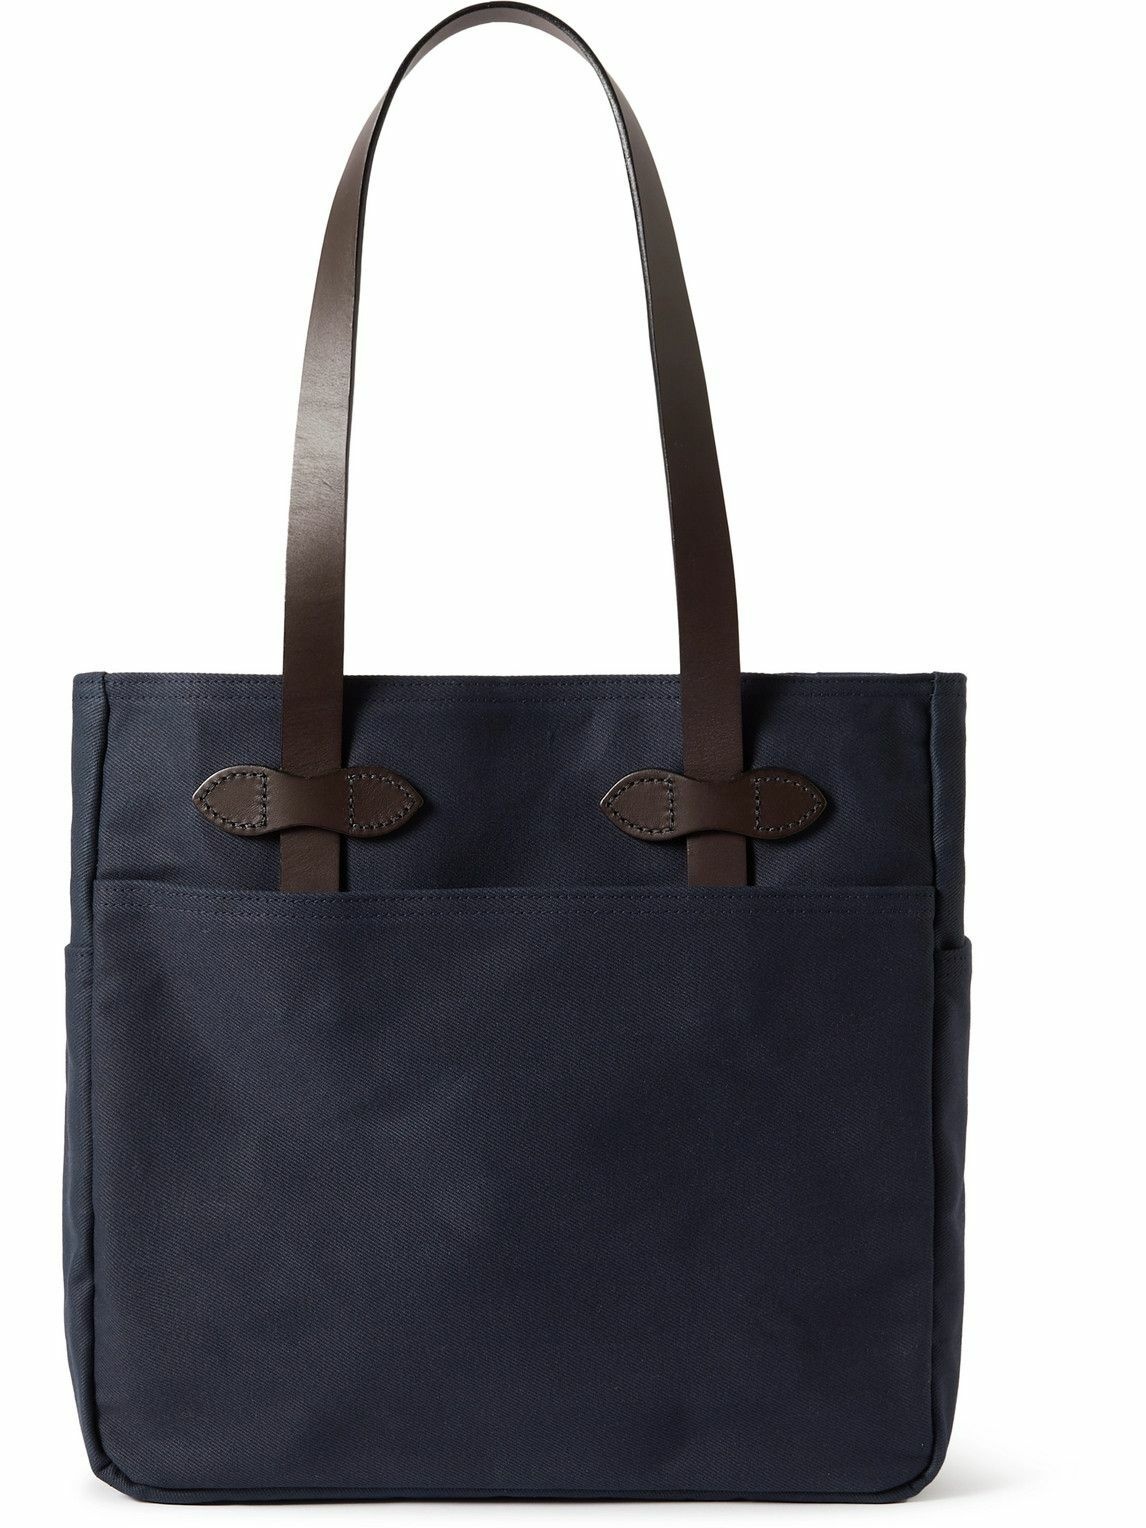 Filson - Leather-Trimmed Twill Tote Bag Filson